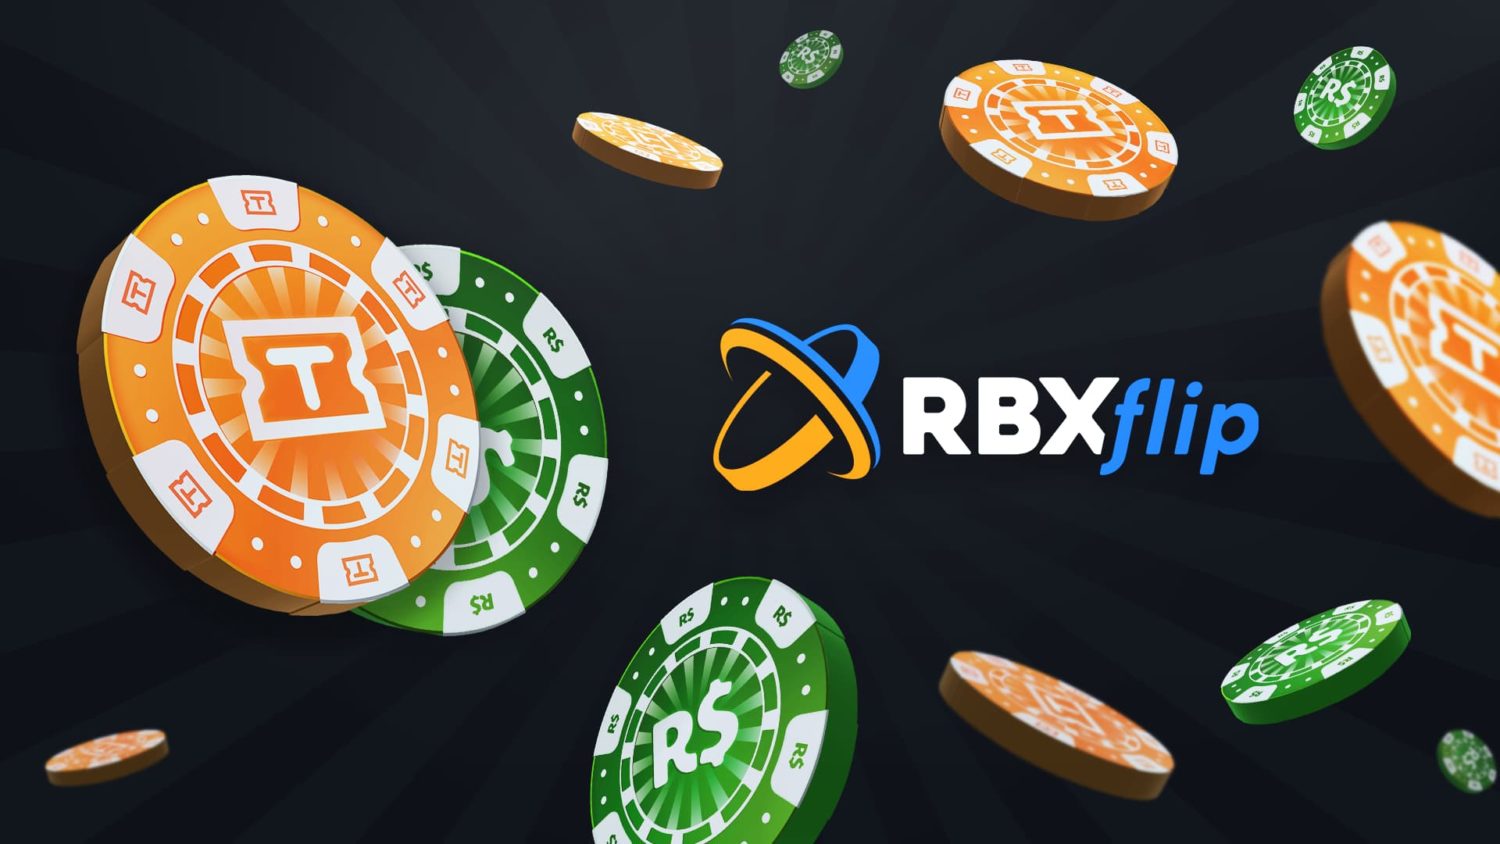 Roblox Trading News on X: Recently Roblox gambling sites such as @rbxflip @ bloxflip and @rblx_wild have been exploding in popularity and Roblox has  been turning a blind eye. These sites at peak